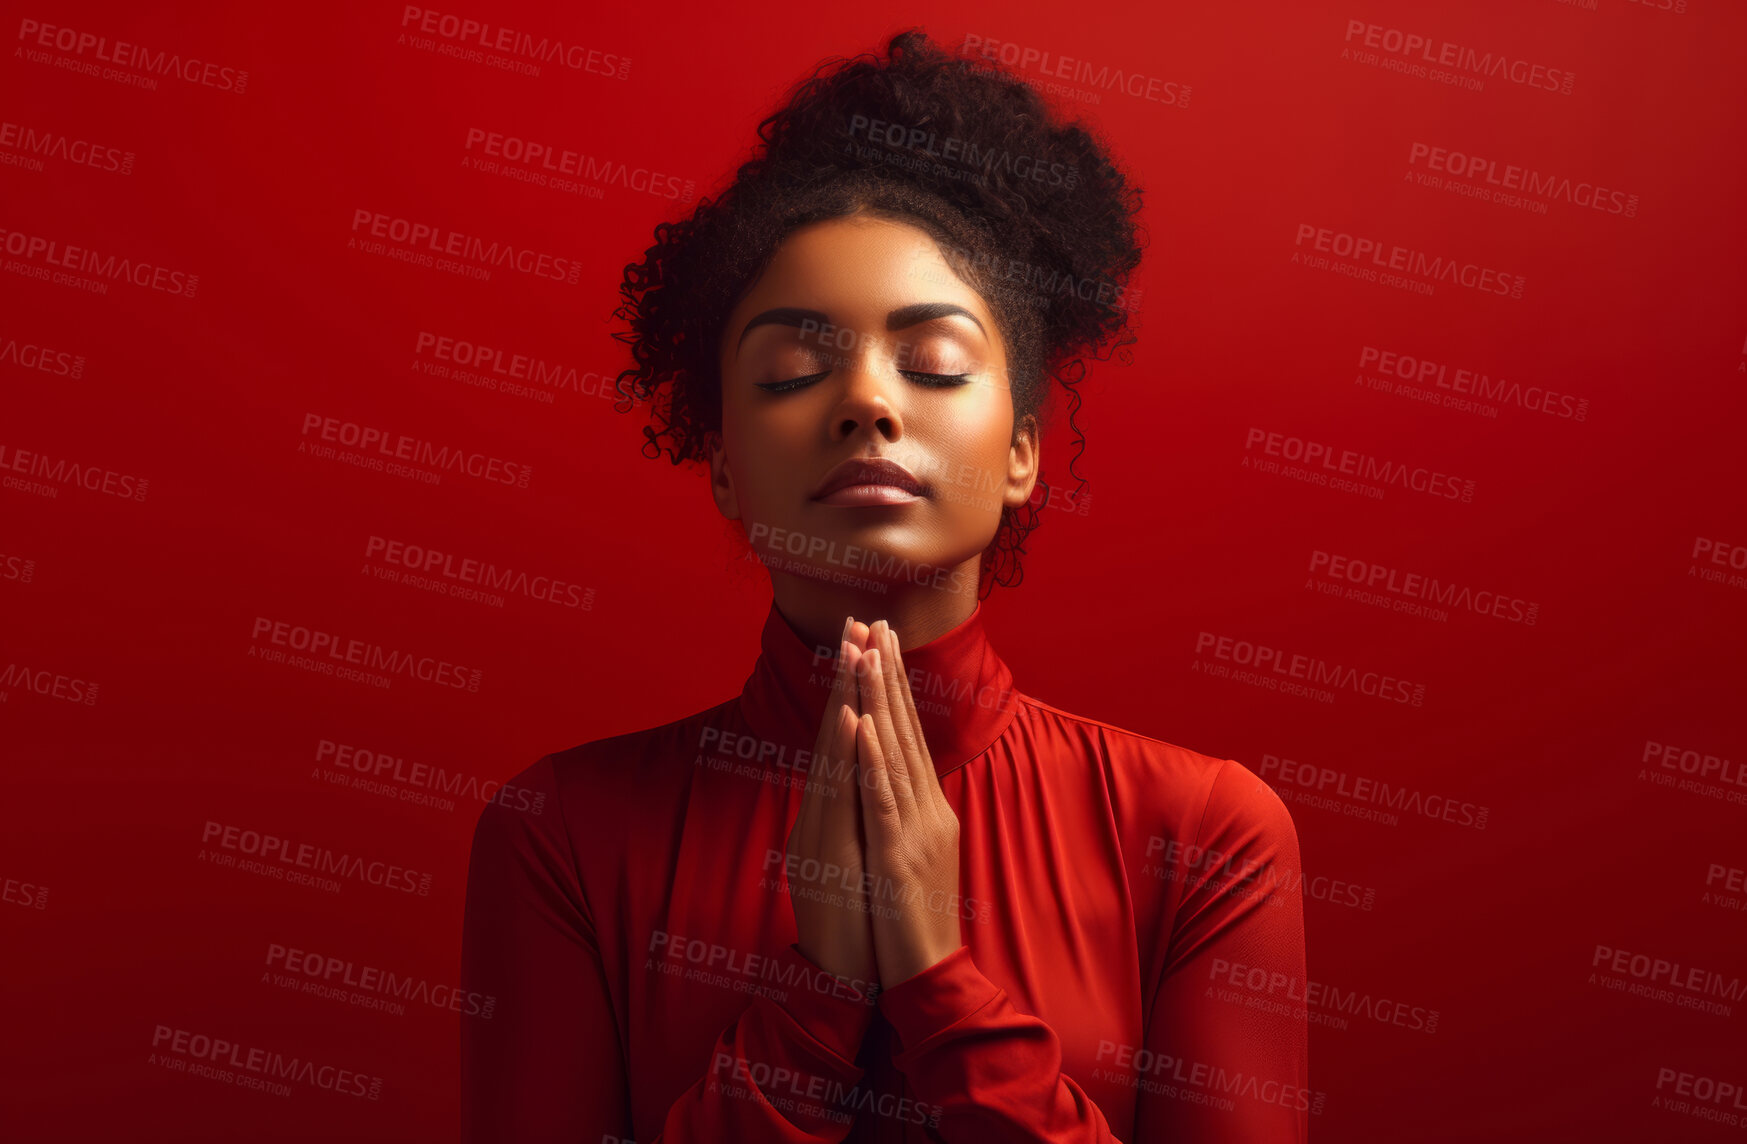 Buy stock photo African American woman praying. Studio portrait. Red backdrop. Religion concept.